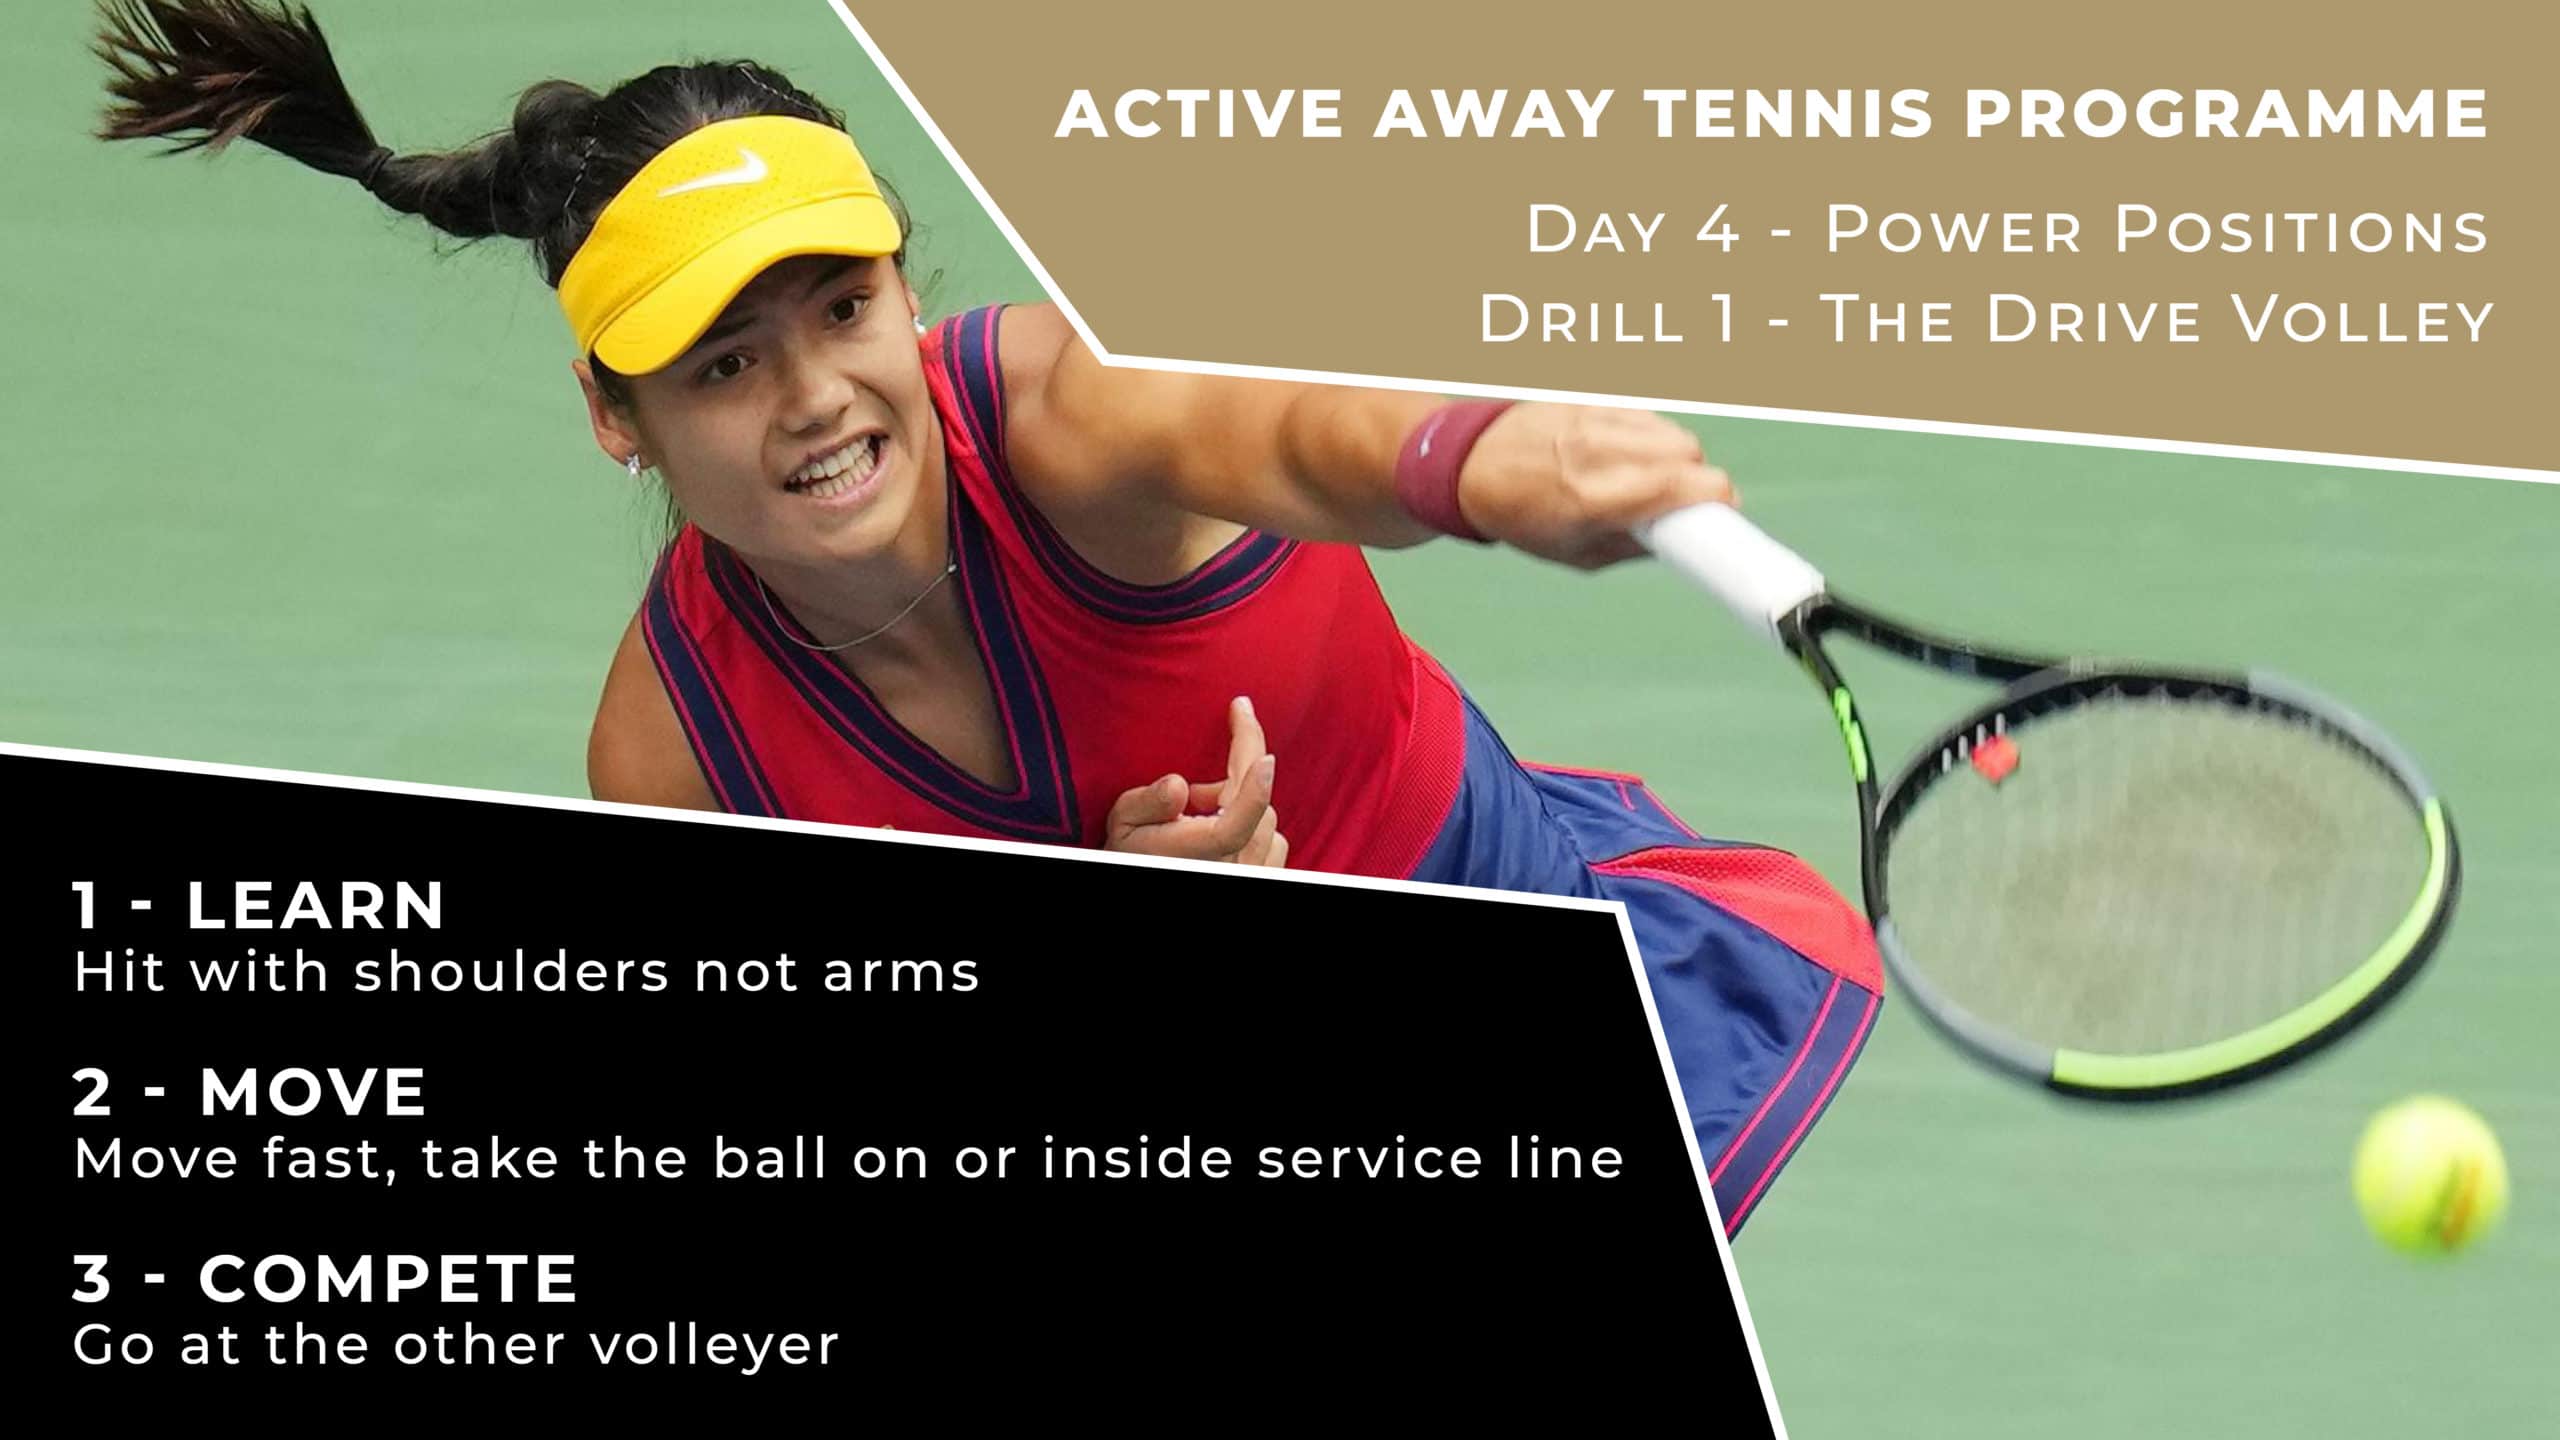 Day 4 - Power Positions Drill 1 - The Drive Volley | Active Away Tennis Programme